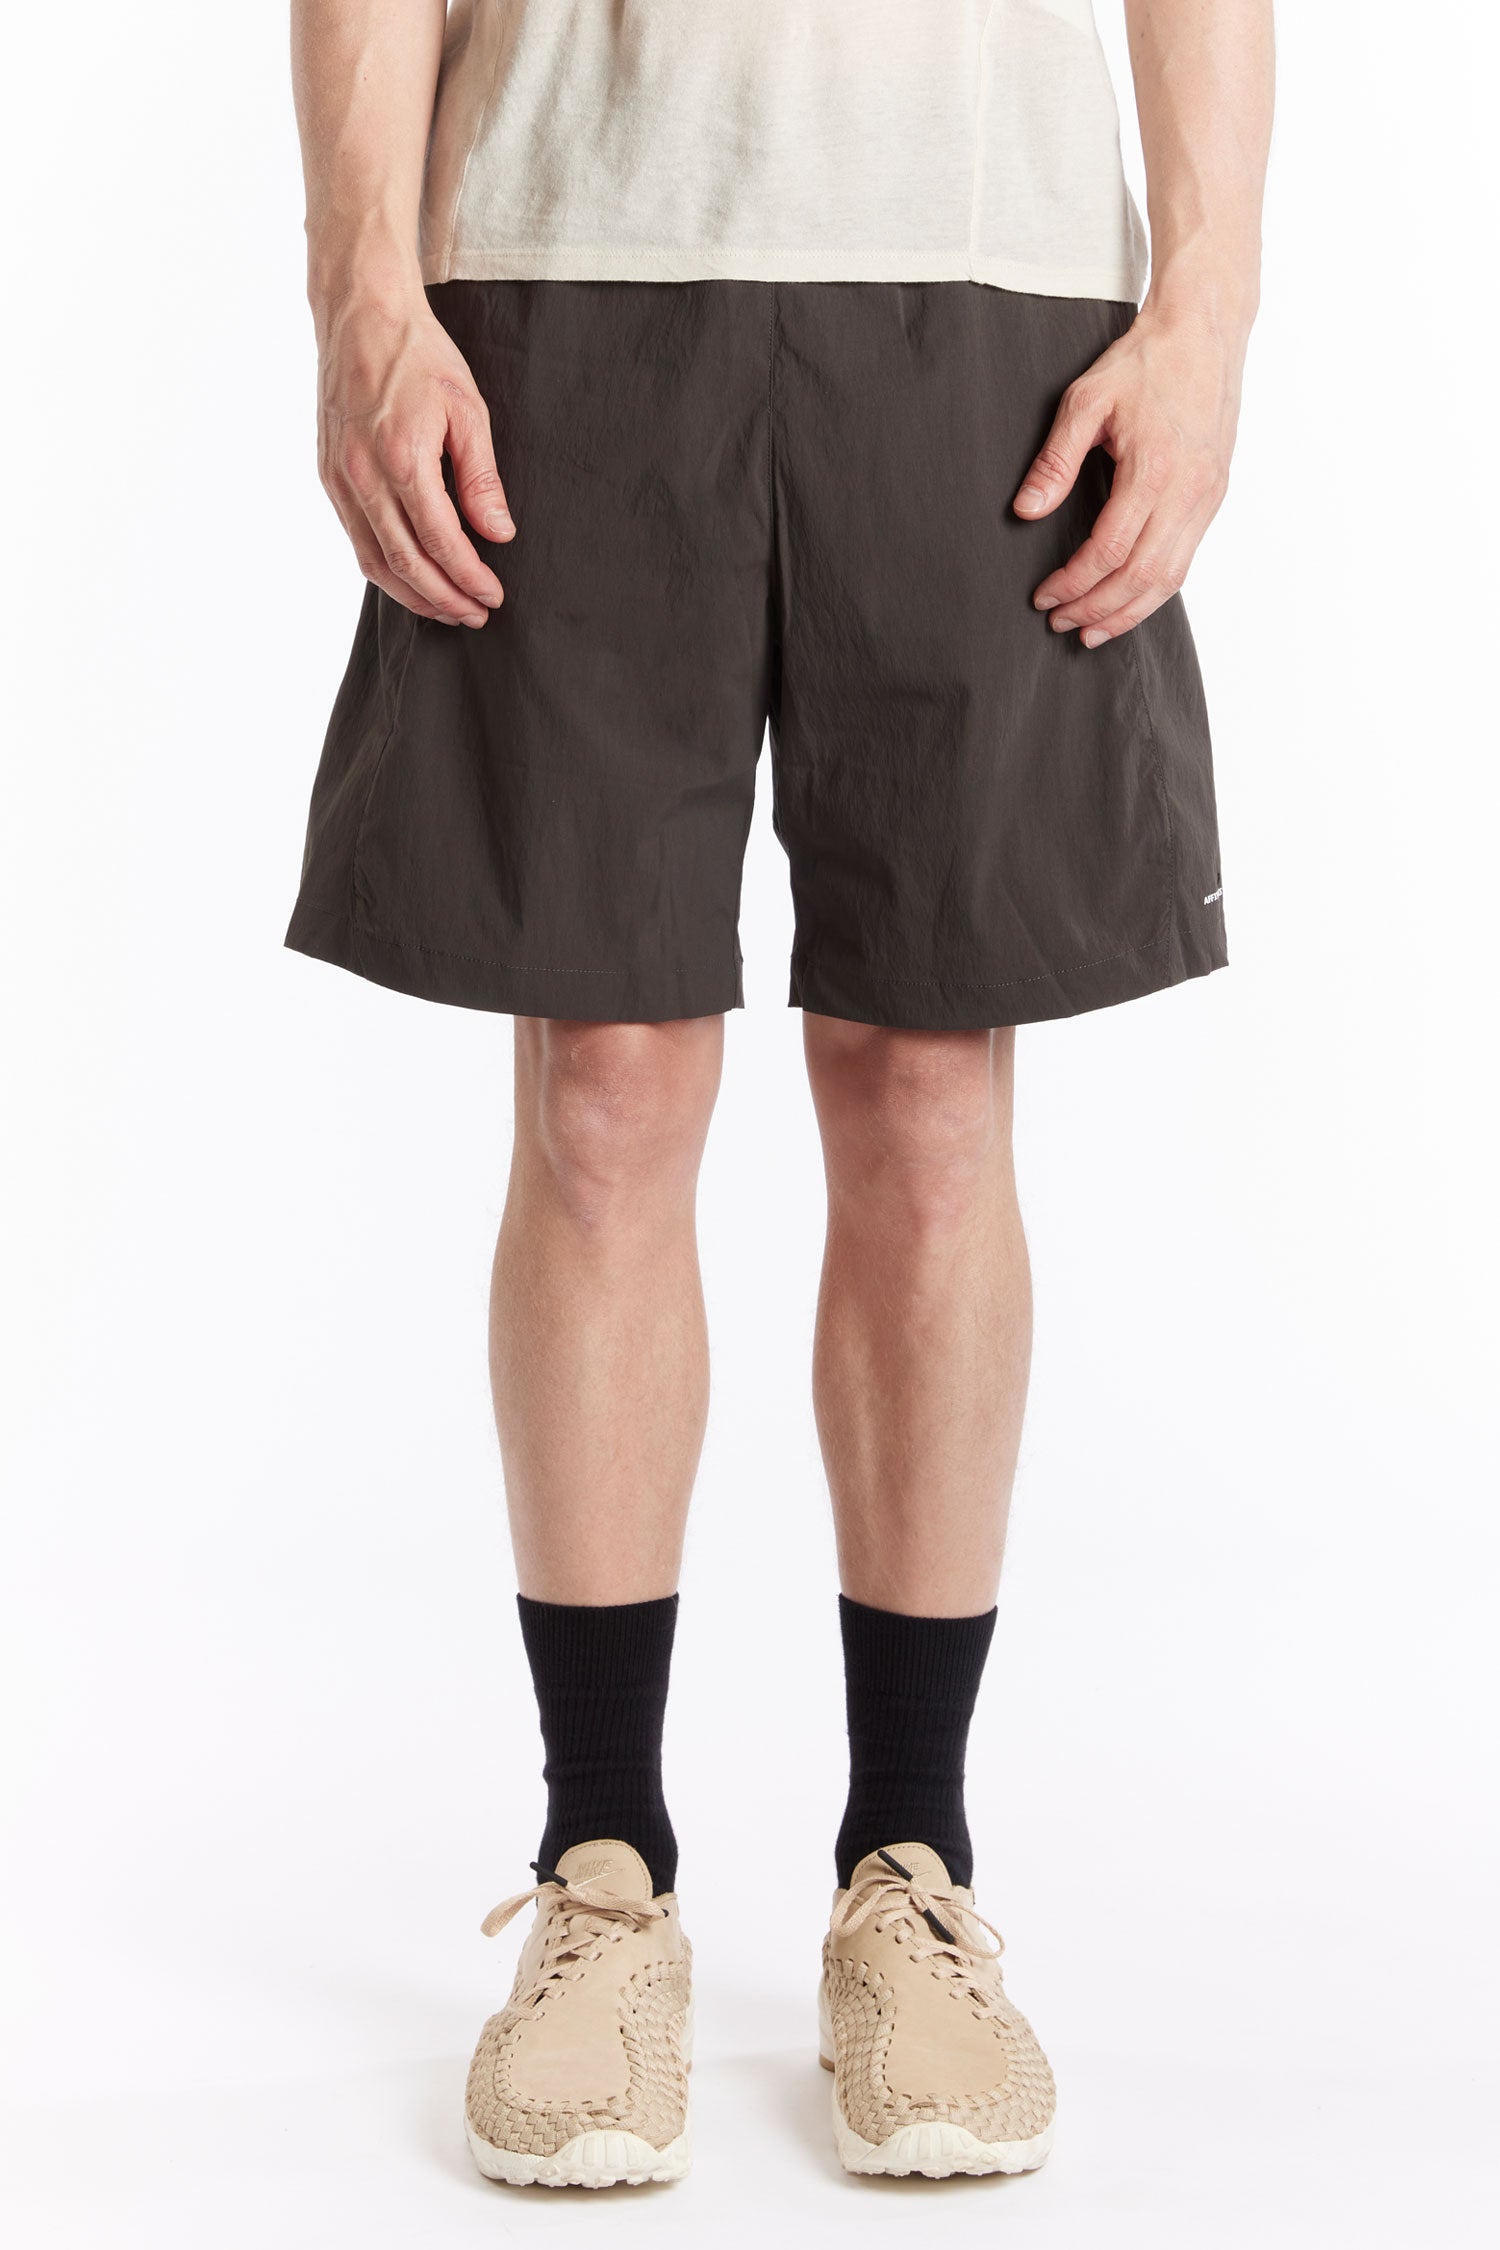 The AFFXWRKS - FLEX SHORT SHALE BROWN available online with global shipping, and in PAM Stores Melbourne and Sydney.